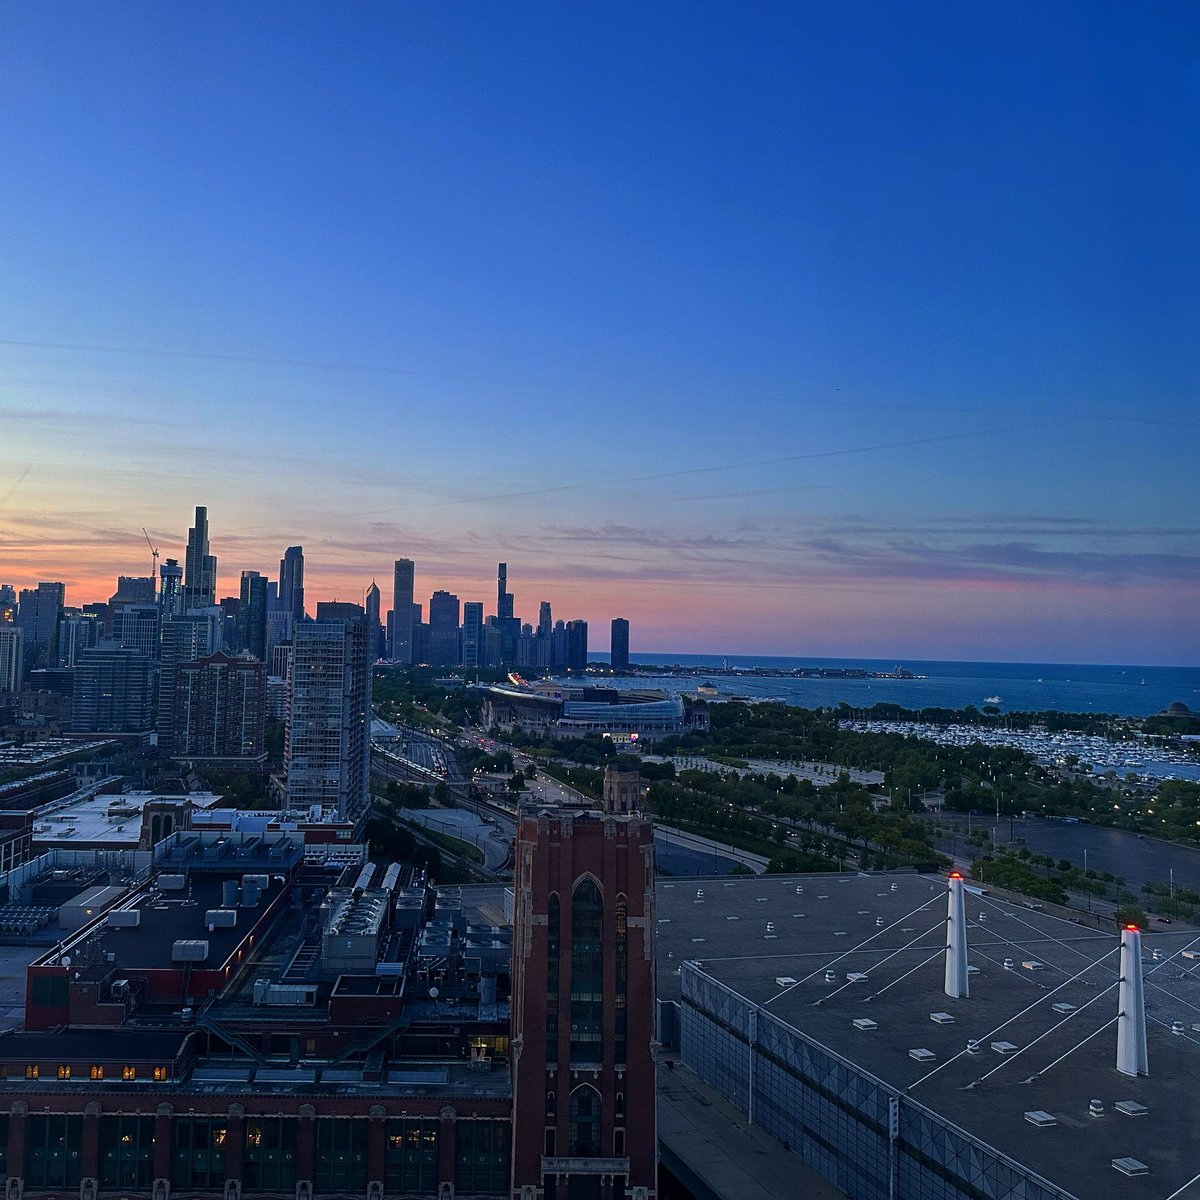 How can you resist?!  That Chicago skyline plus amazing #ASCO23 content!  Register today at am.asco.org #youhavetobehere